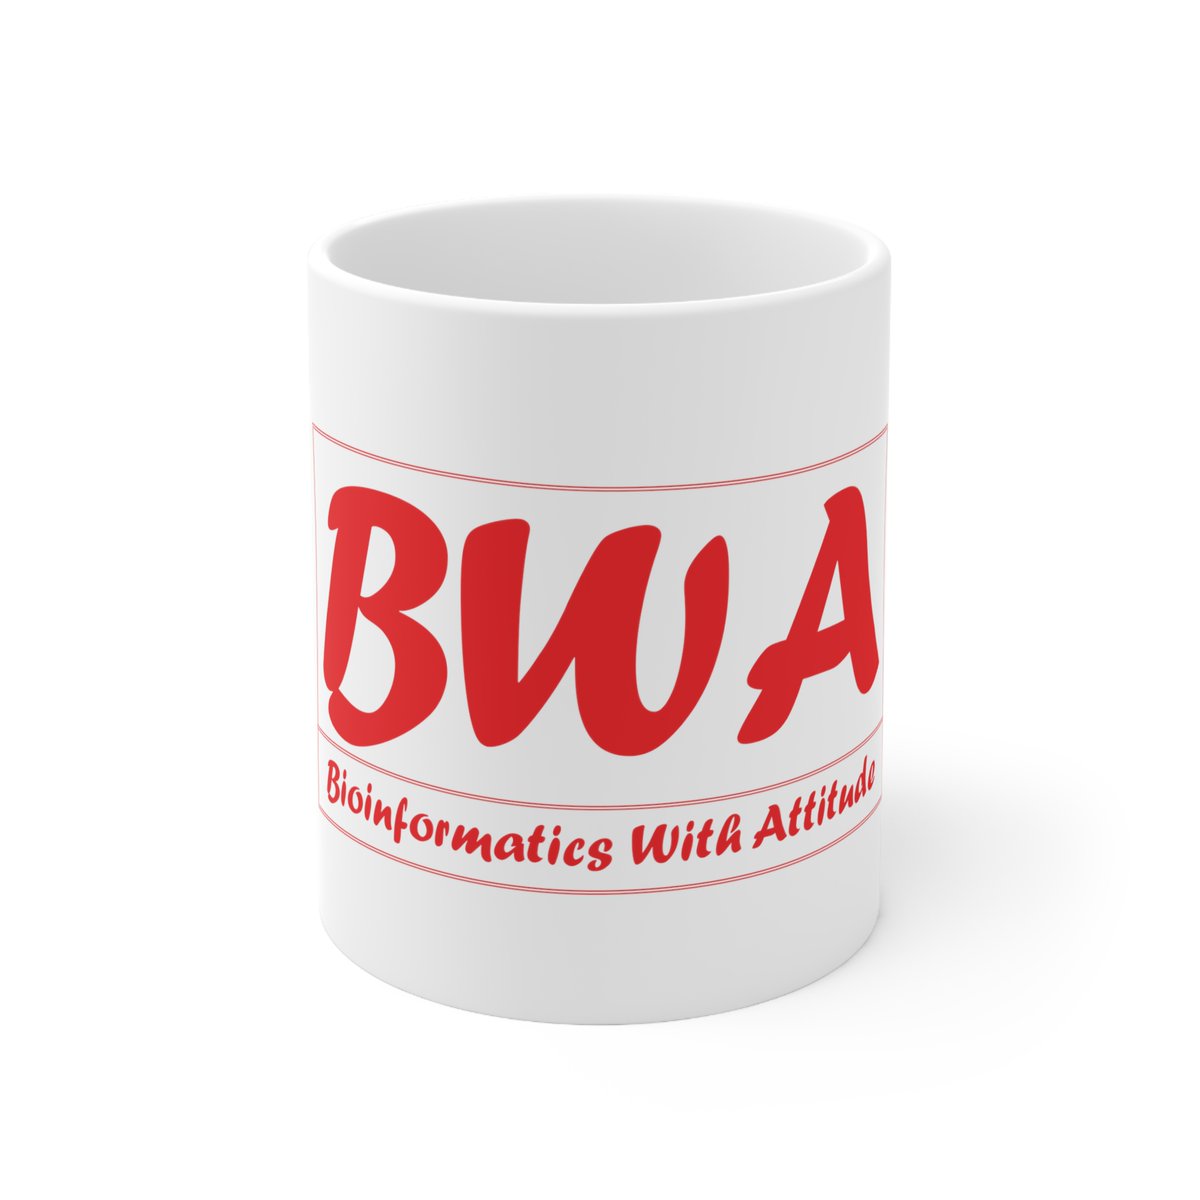 Funny mug for the bioinformatician in your life 😂